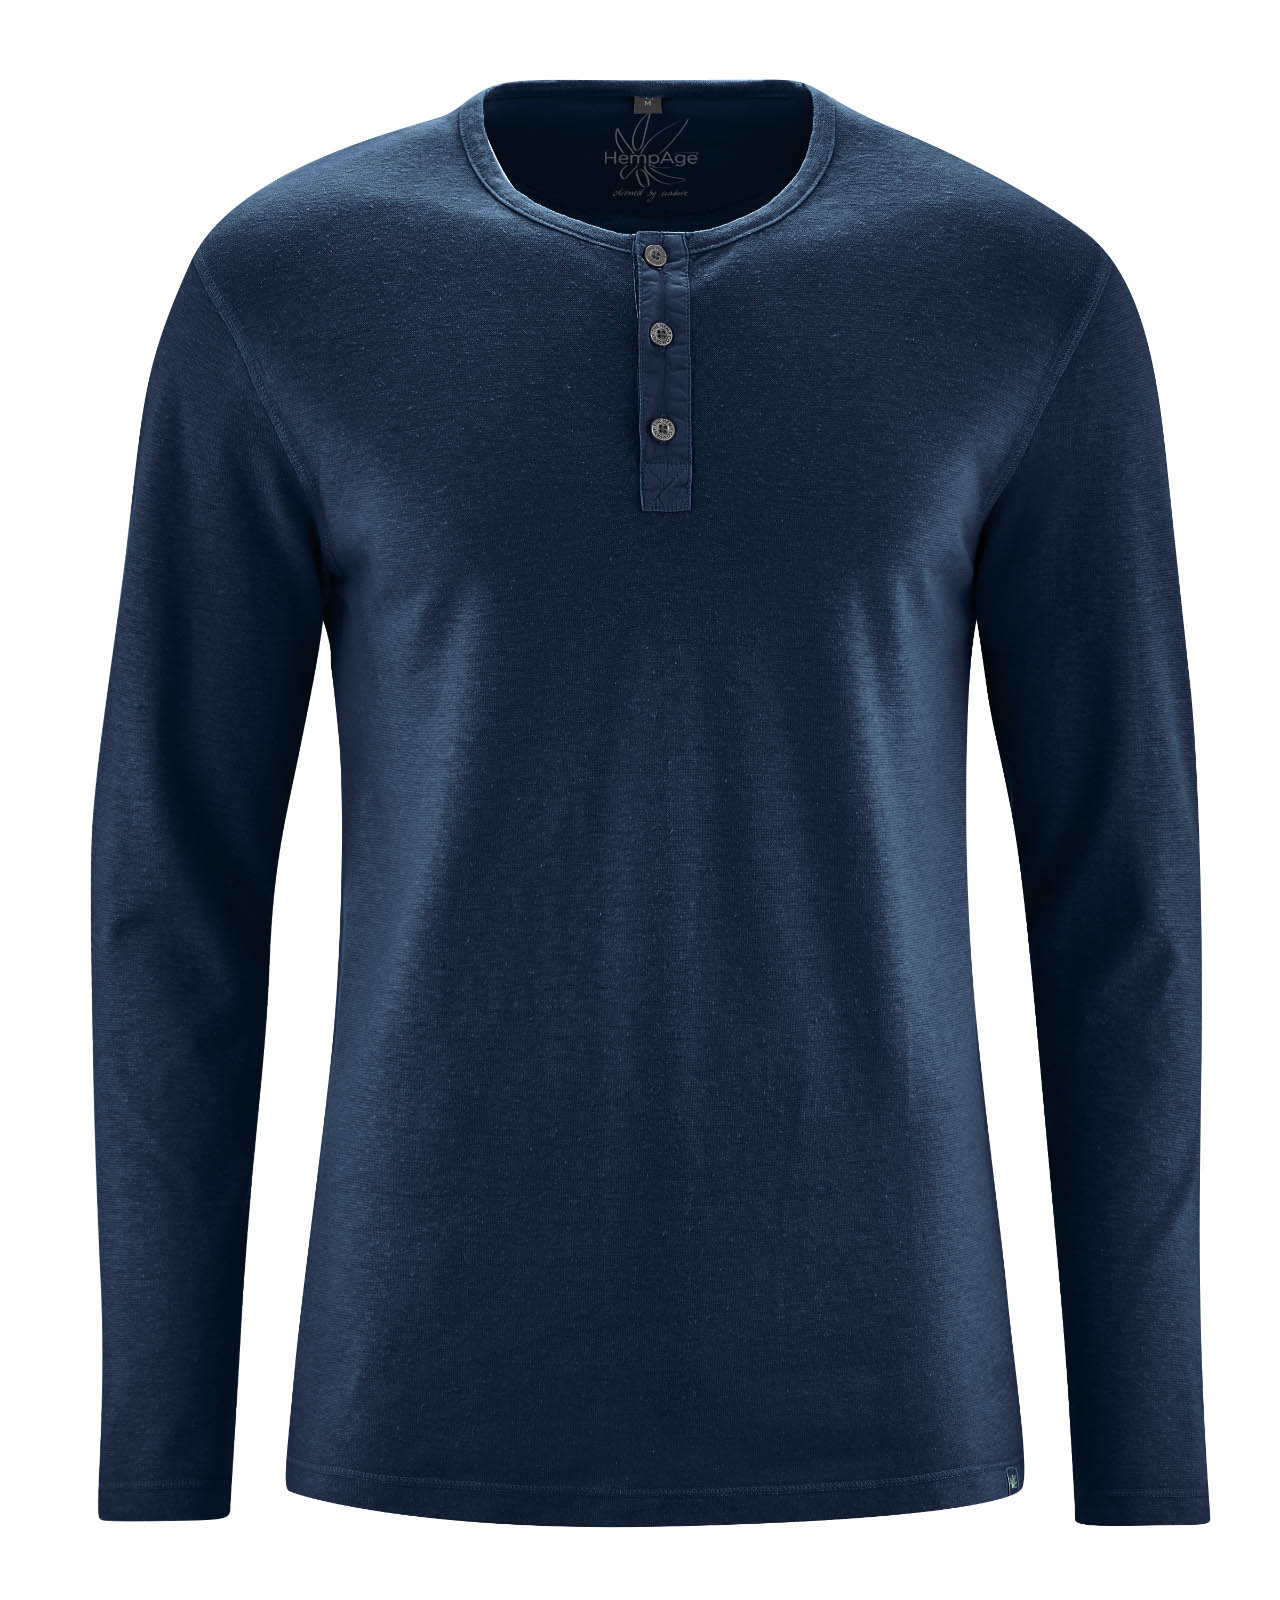 t-shirt chanvre homme DH833_a_navy